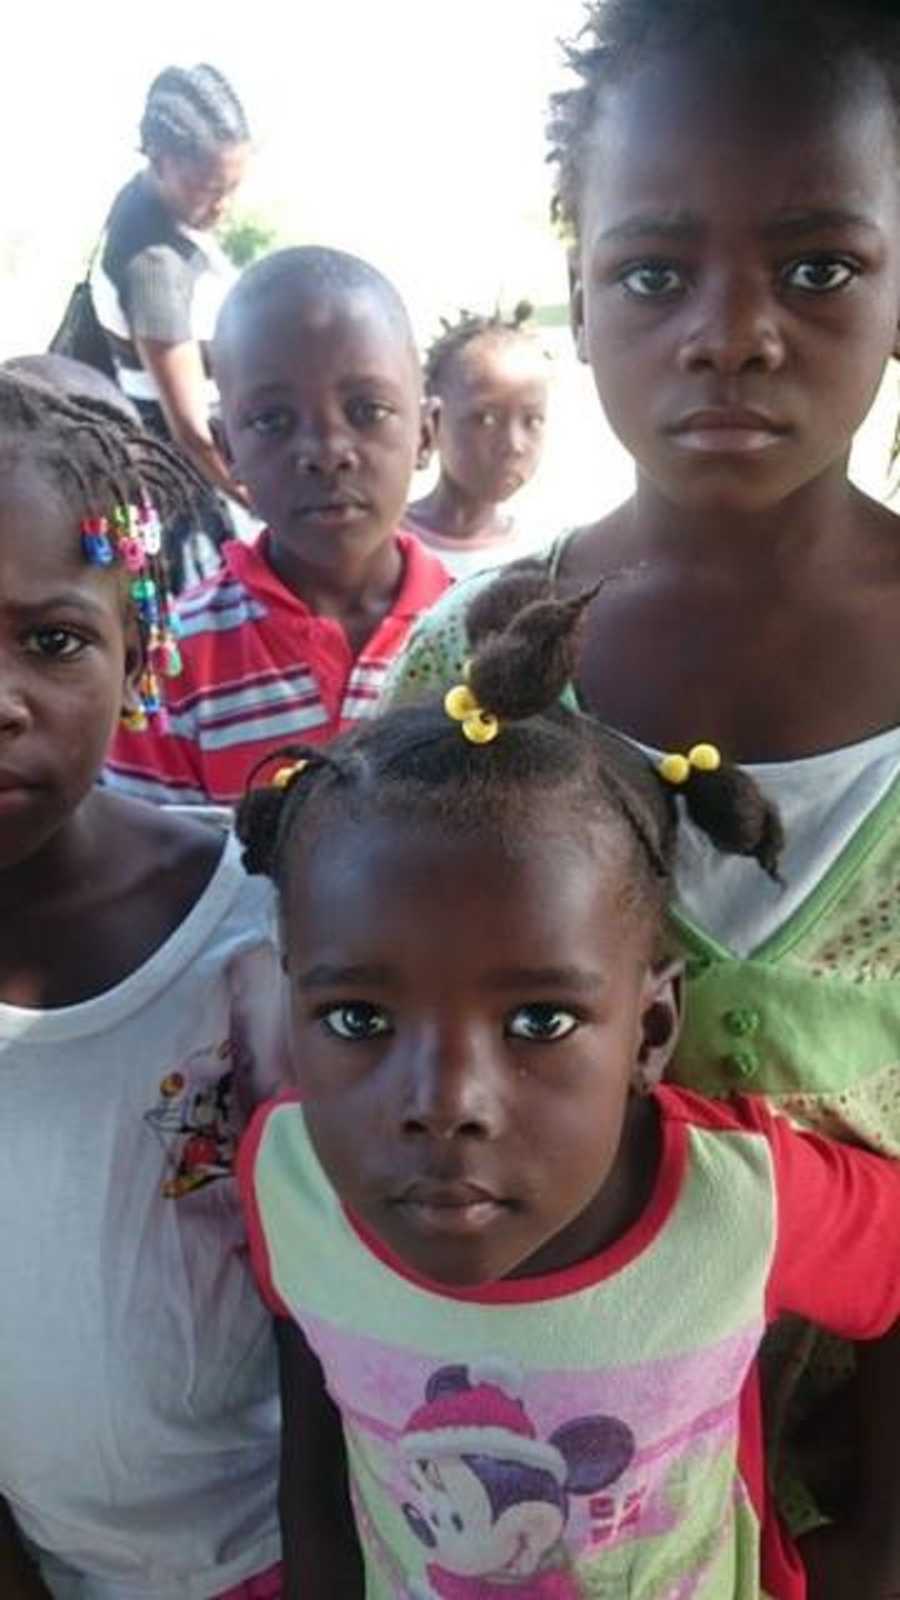 Faces of young Haitian orphans who all look sad